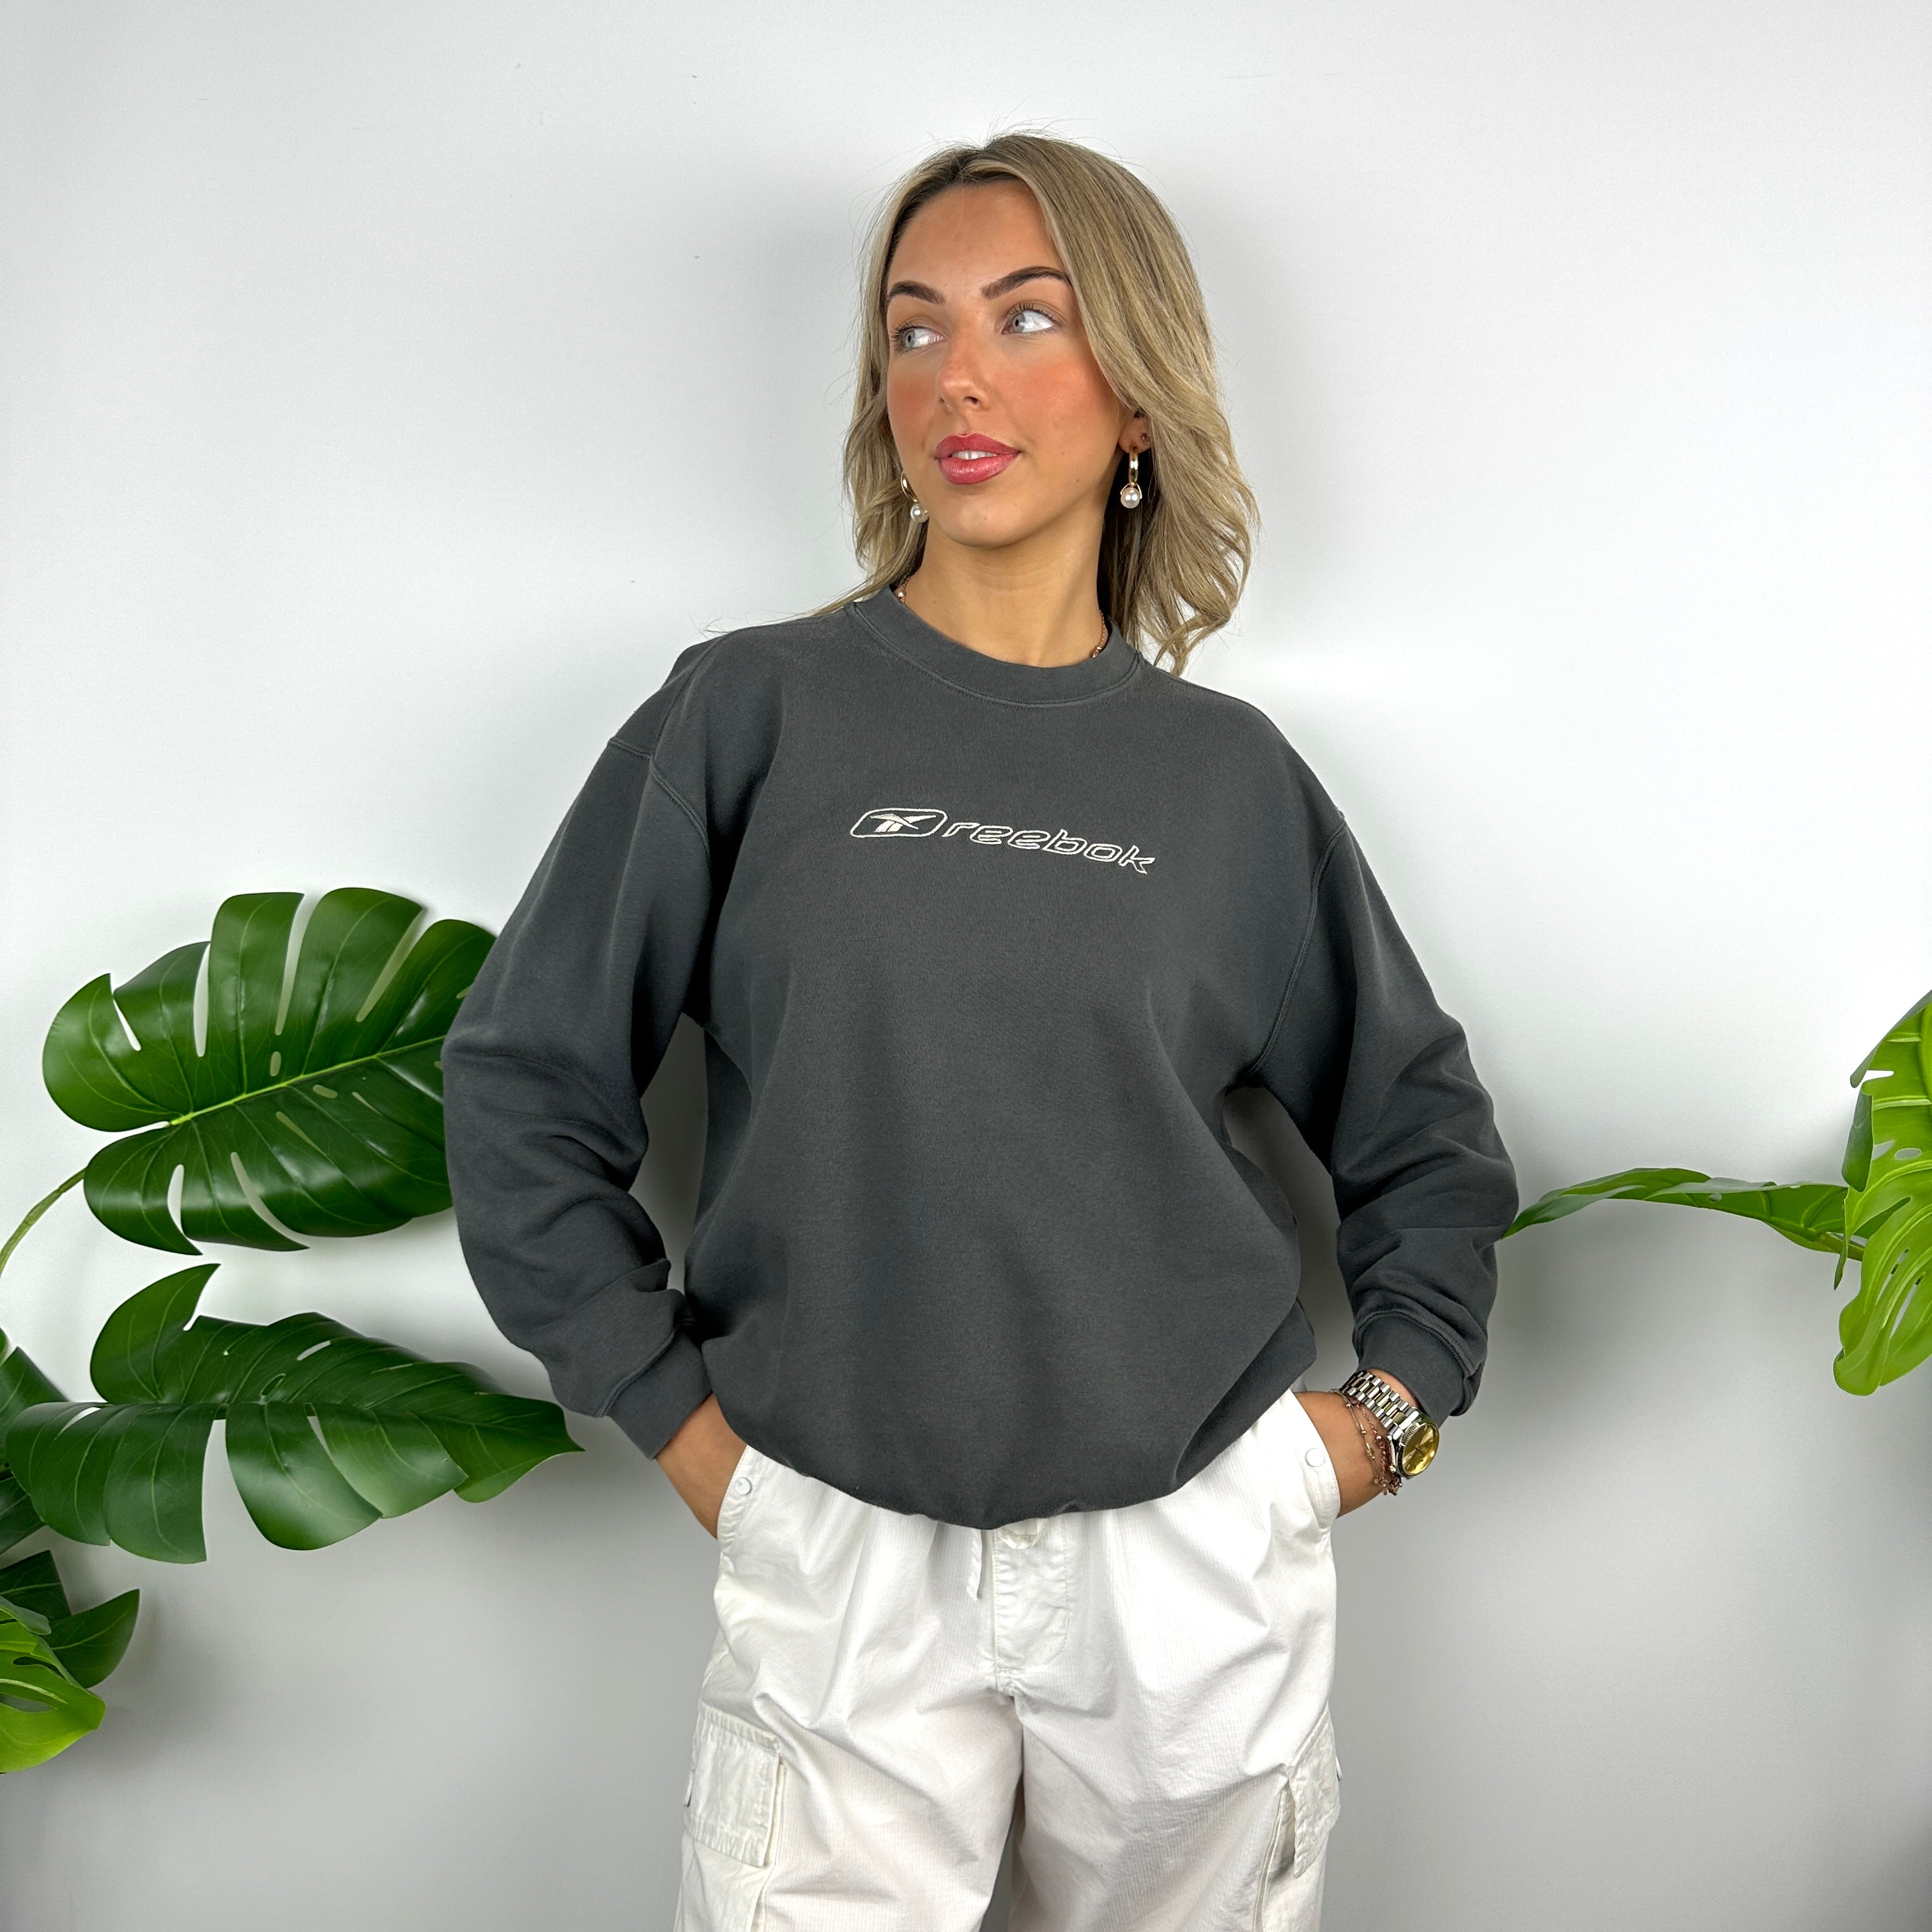 Reebok Grey Embroidered Spell Out Sweatshirt (S)